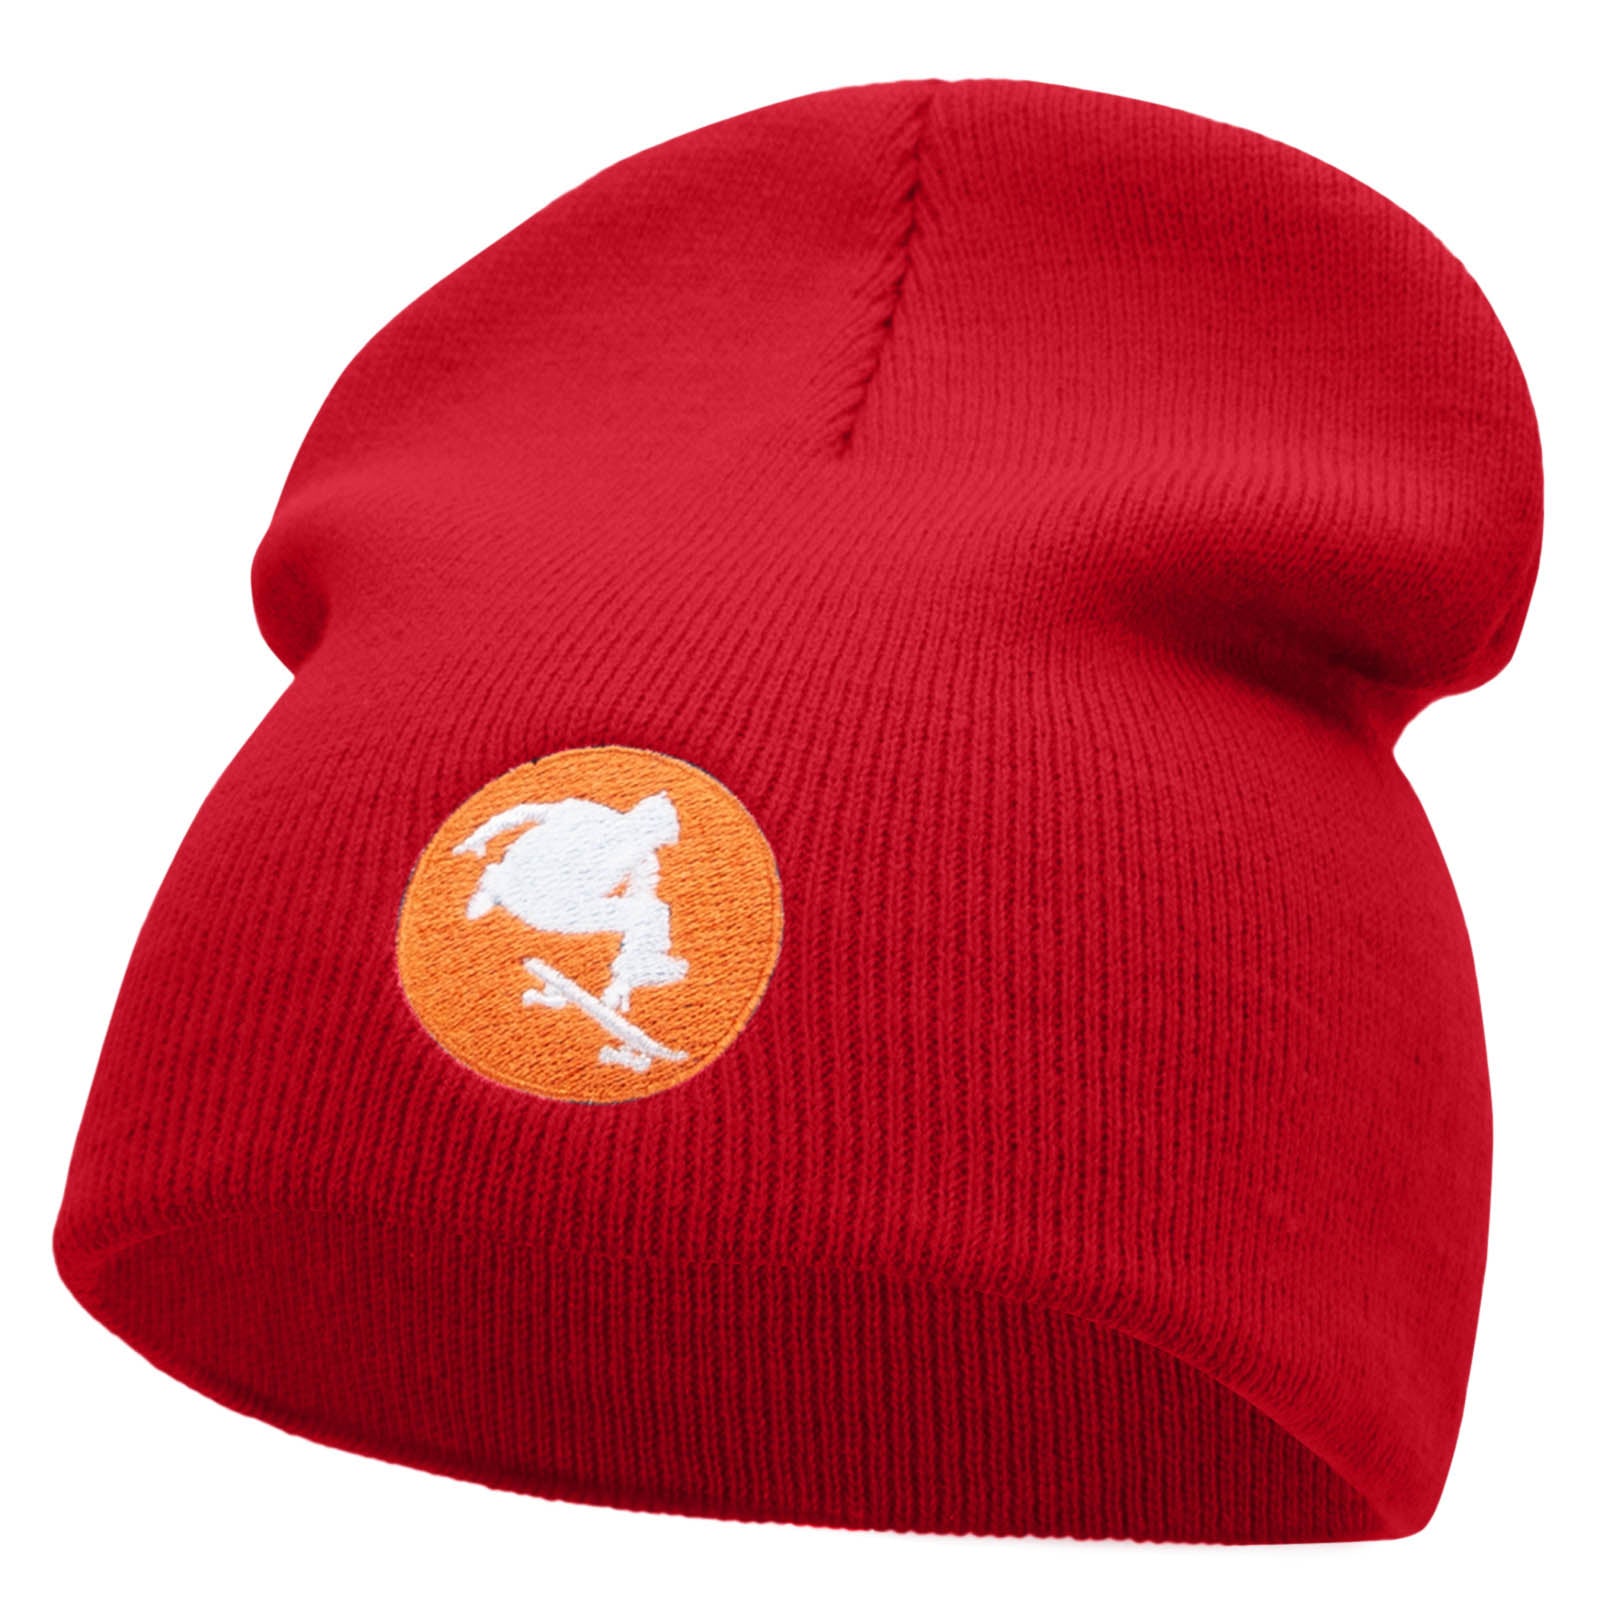 Skate Trick Embroidered 8 Inch Short Beanie - Red OSFM